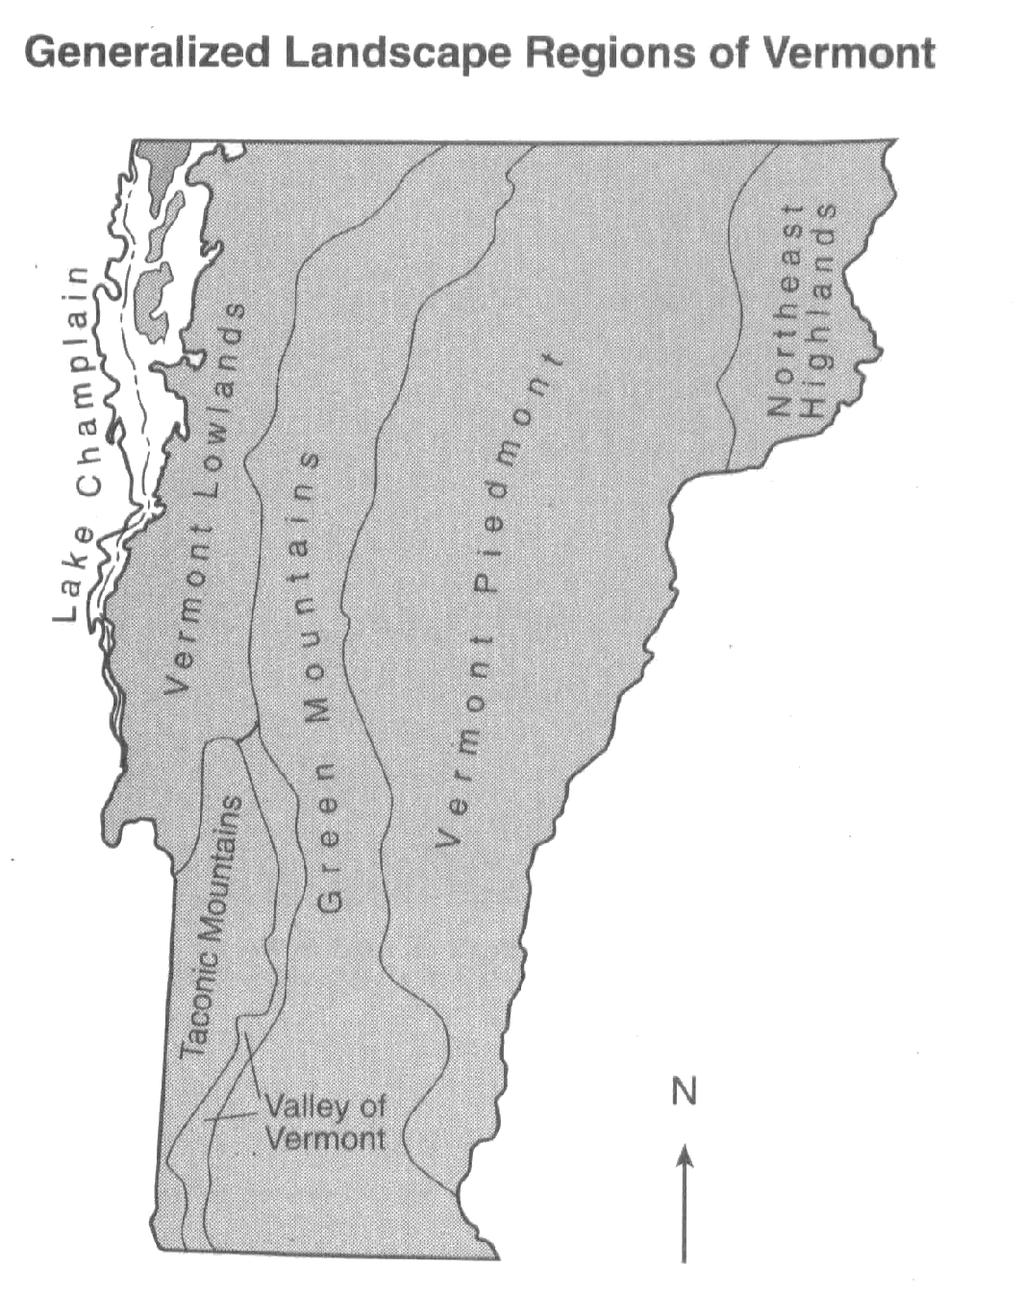 Which processes formed the granite that is mined in Vermont?